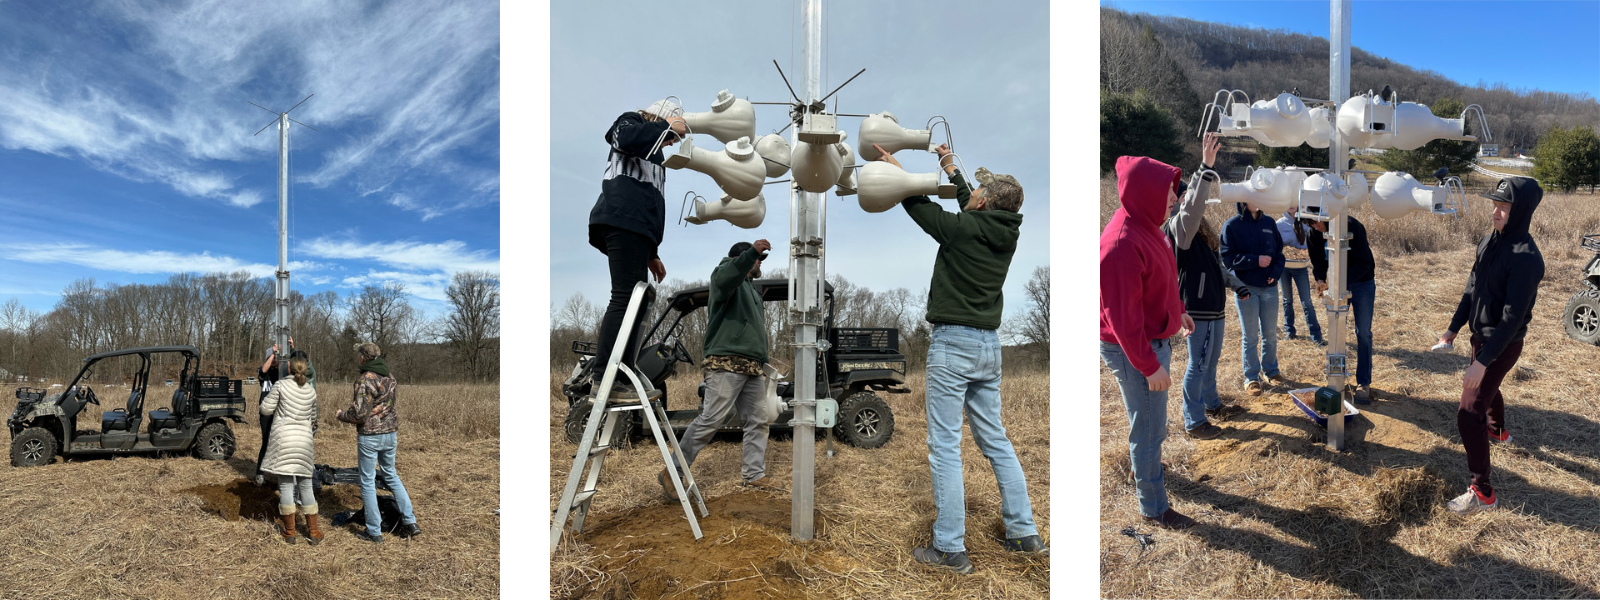 Collage of three photos. The first shows three people standing up a large metal post. The second shows three people installing white gourd-shaped nest boxes on the post. The third shows a group of six people inspecting the completed structure.